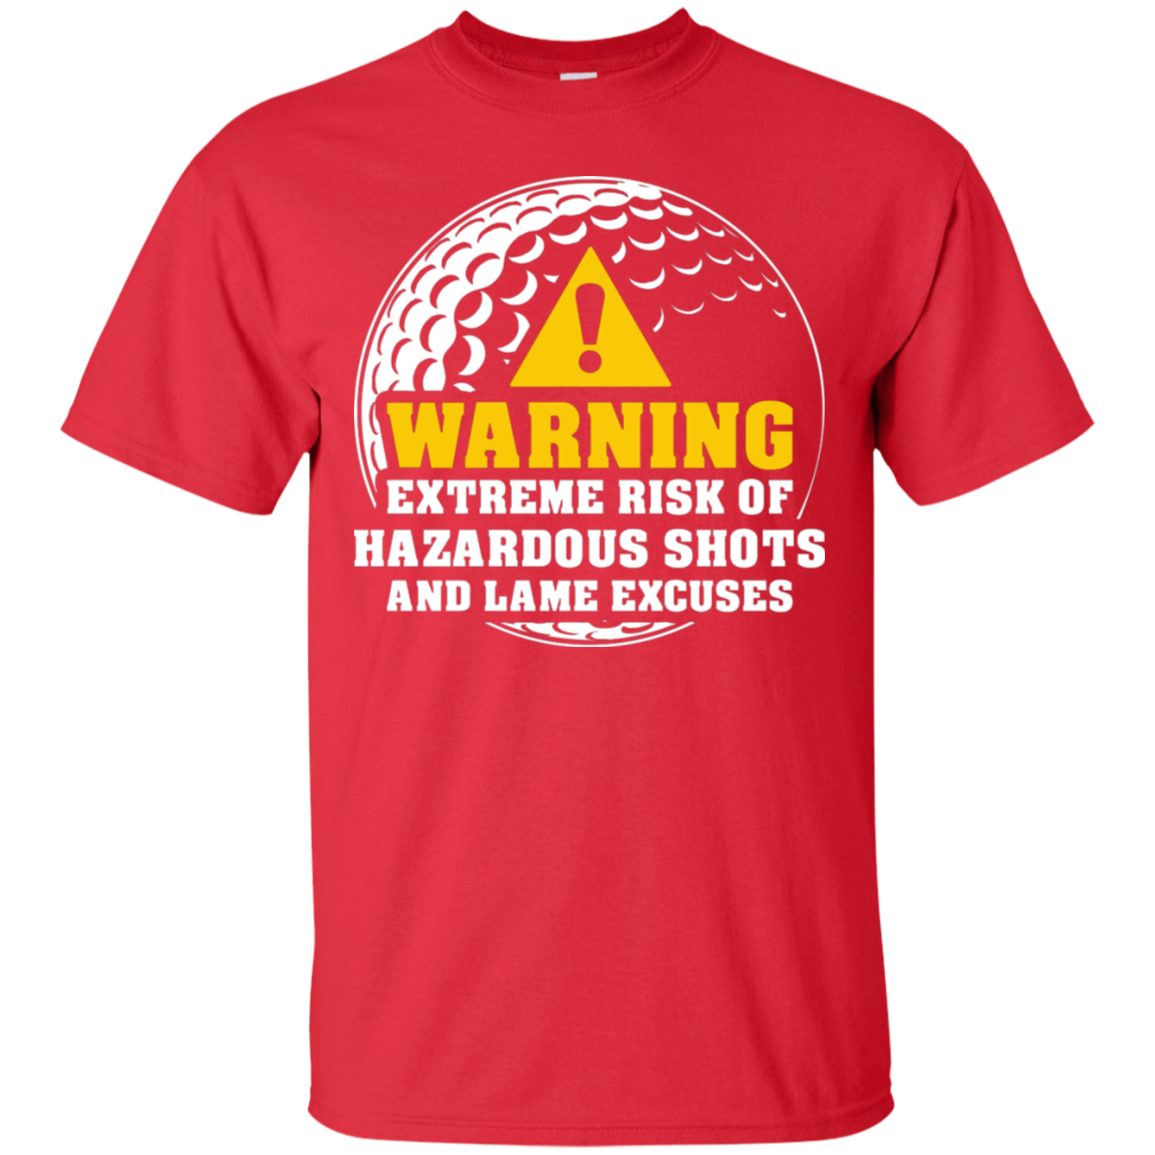 Warning! Extreme Risk Of Hazardous Shouts And Lame Excuses T-Shirt Apparel - The Beer Lodge